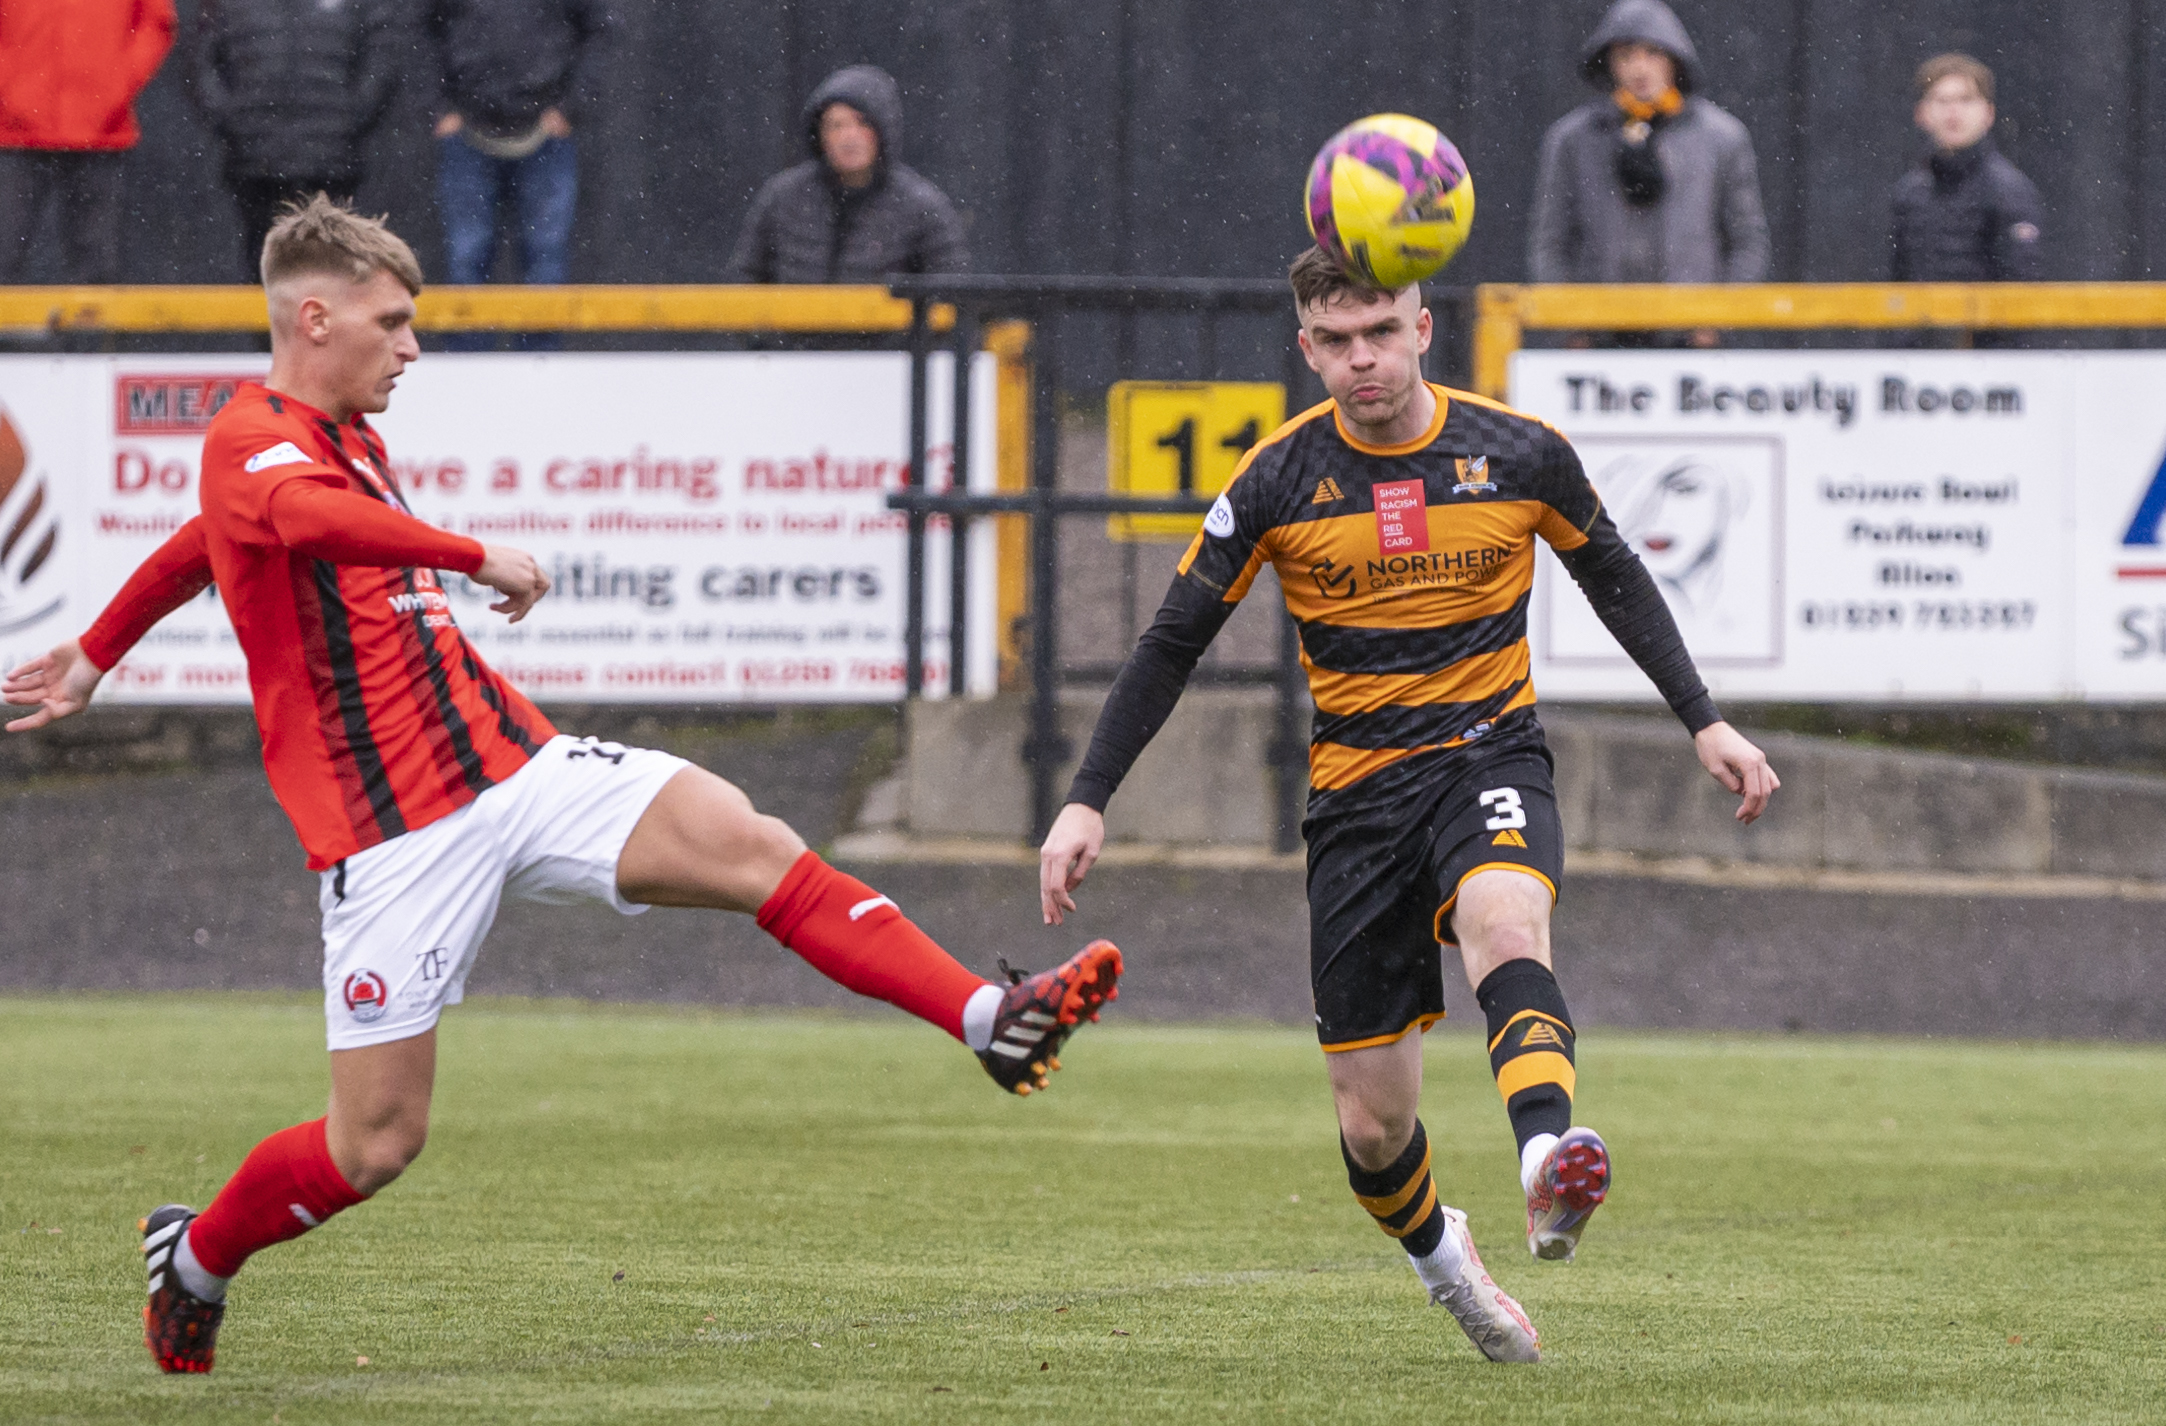 Alloa 2-1 Clyde: Last-gasp winner from Donnelly seals Wasps win